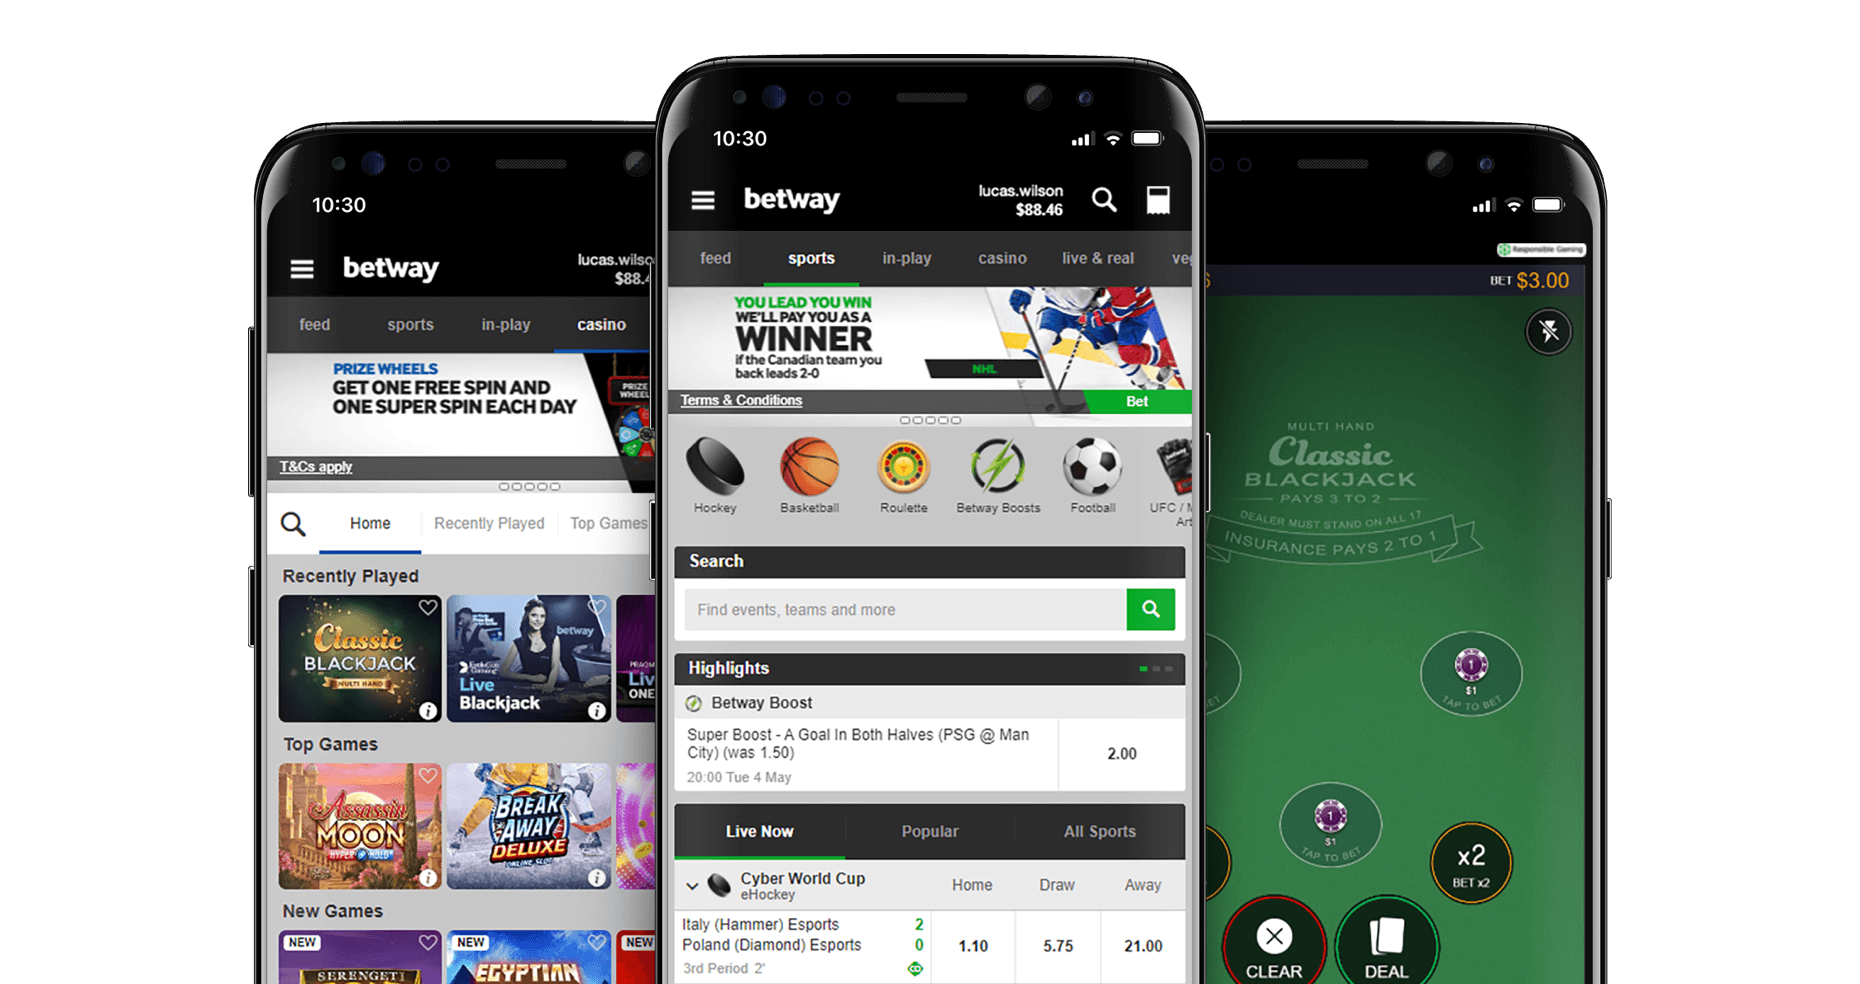 Open Mike on betting app cricket